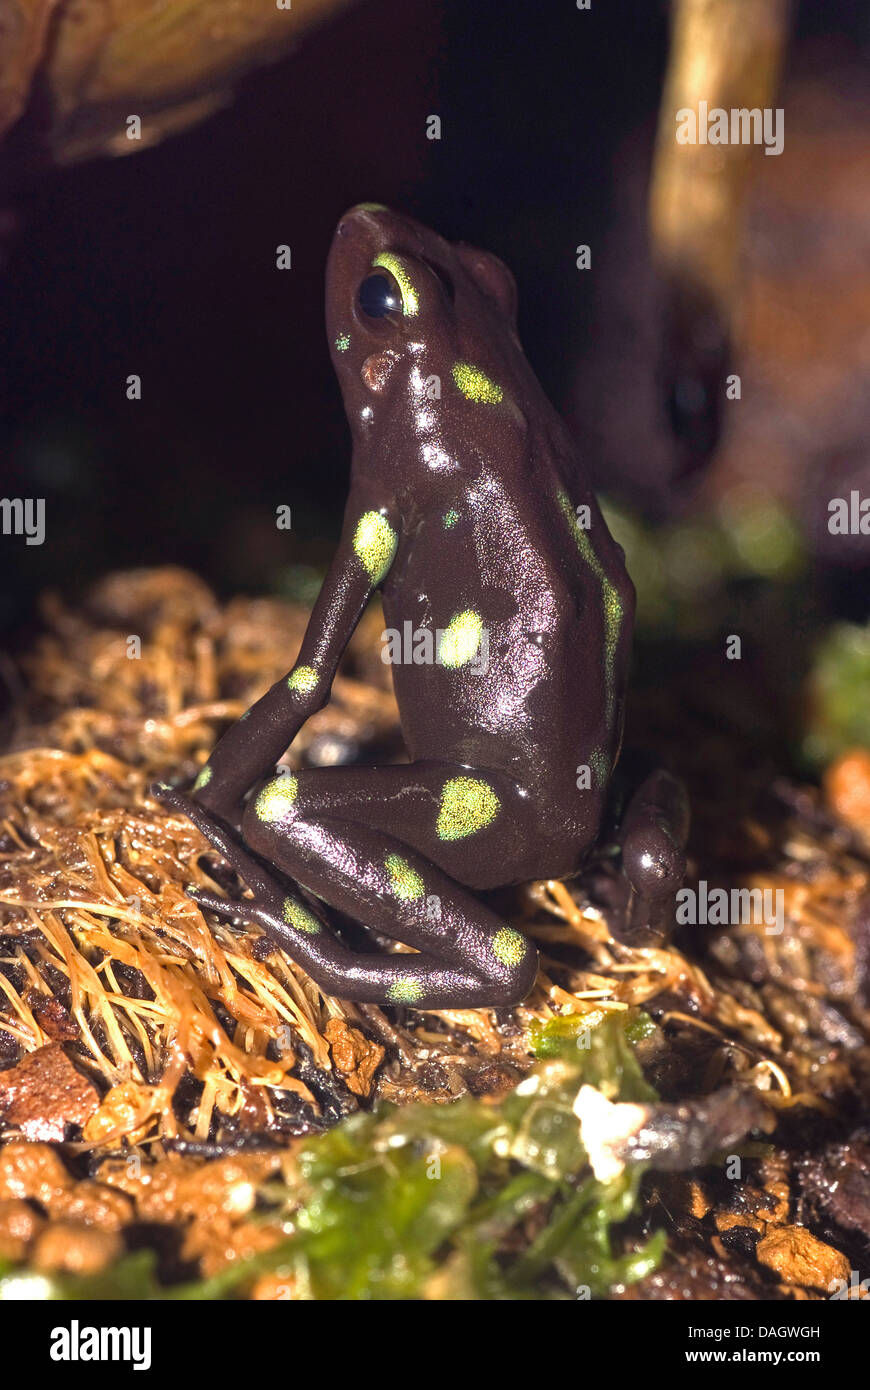 Green and black poison-arrow frog, Green and black poison frog (Dendrobates auratus), black and yellow morph from the canal zone, KZ Ffm Stock Photo